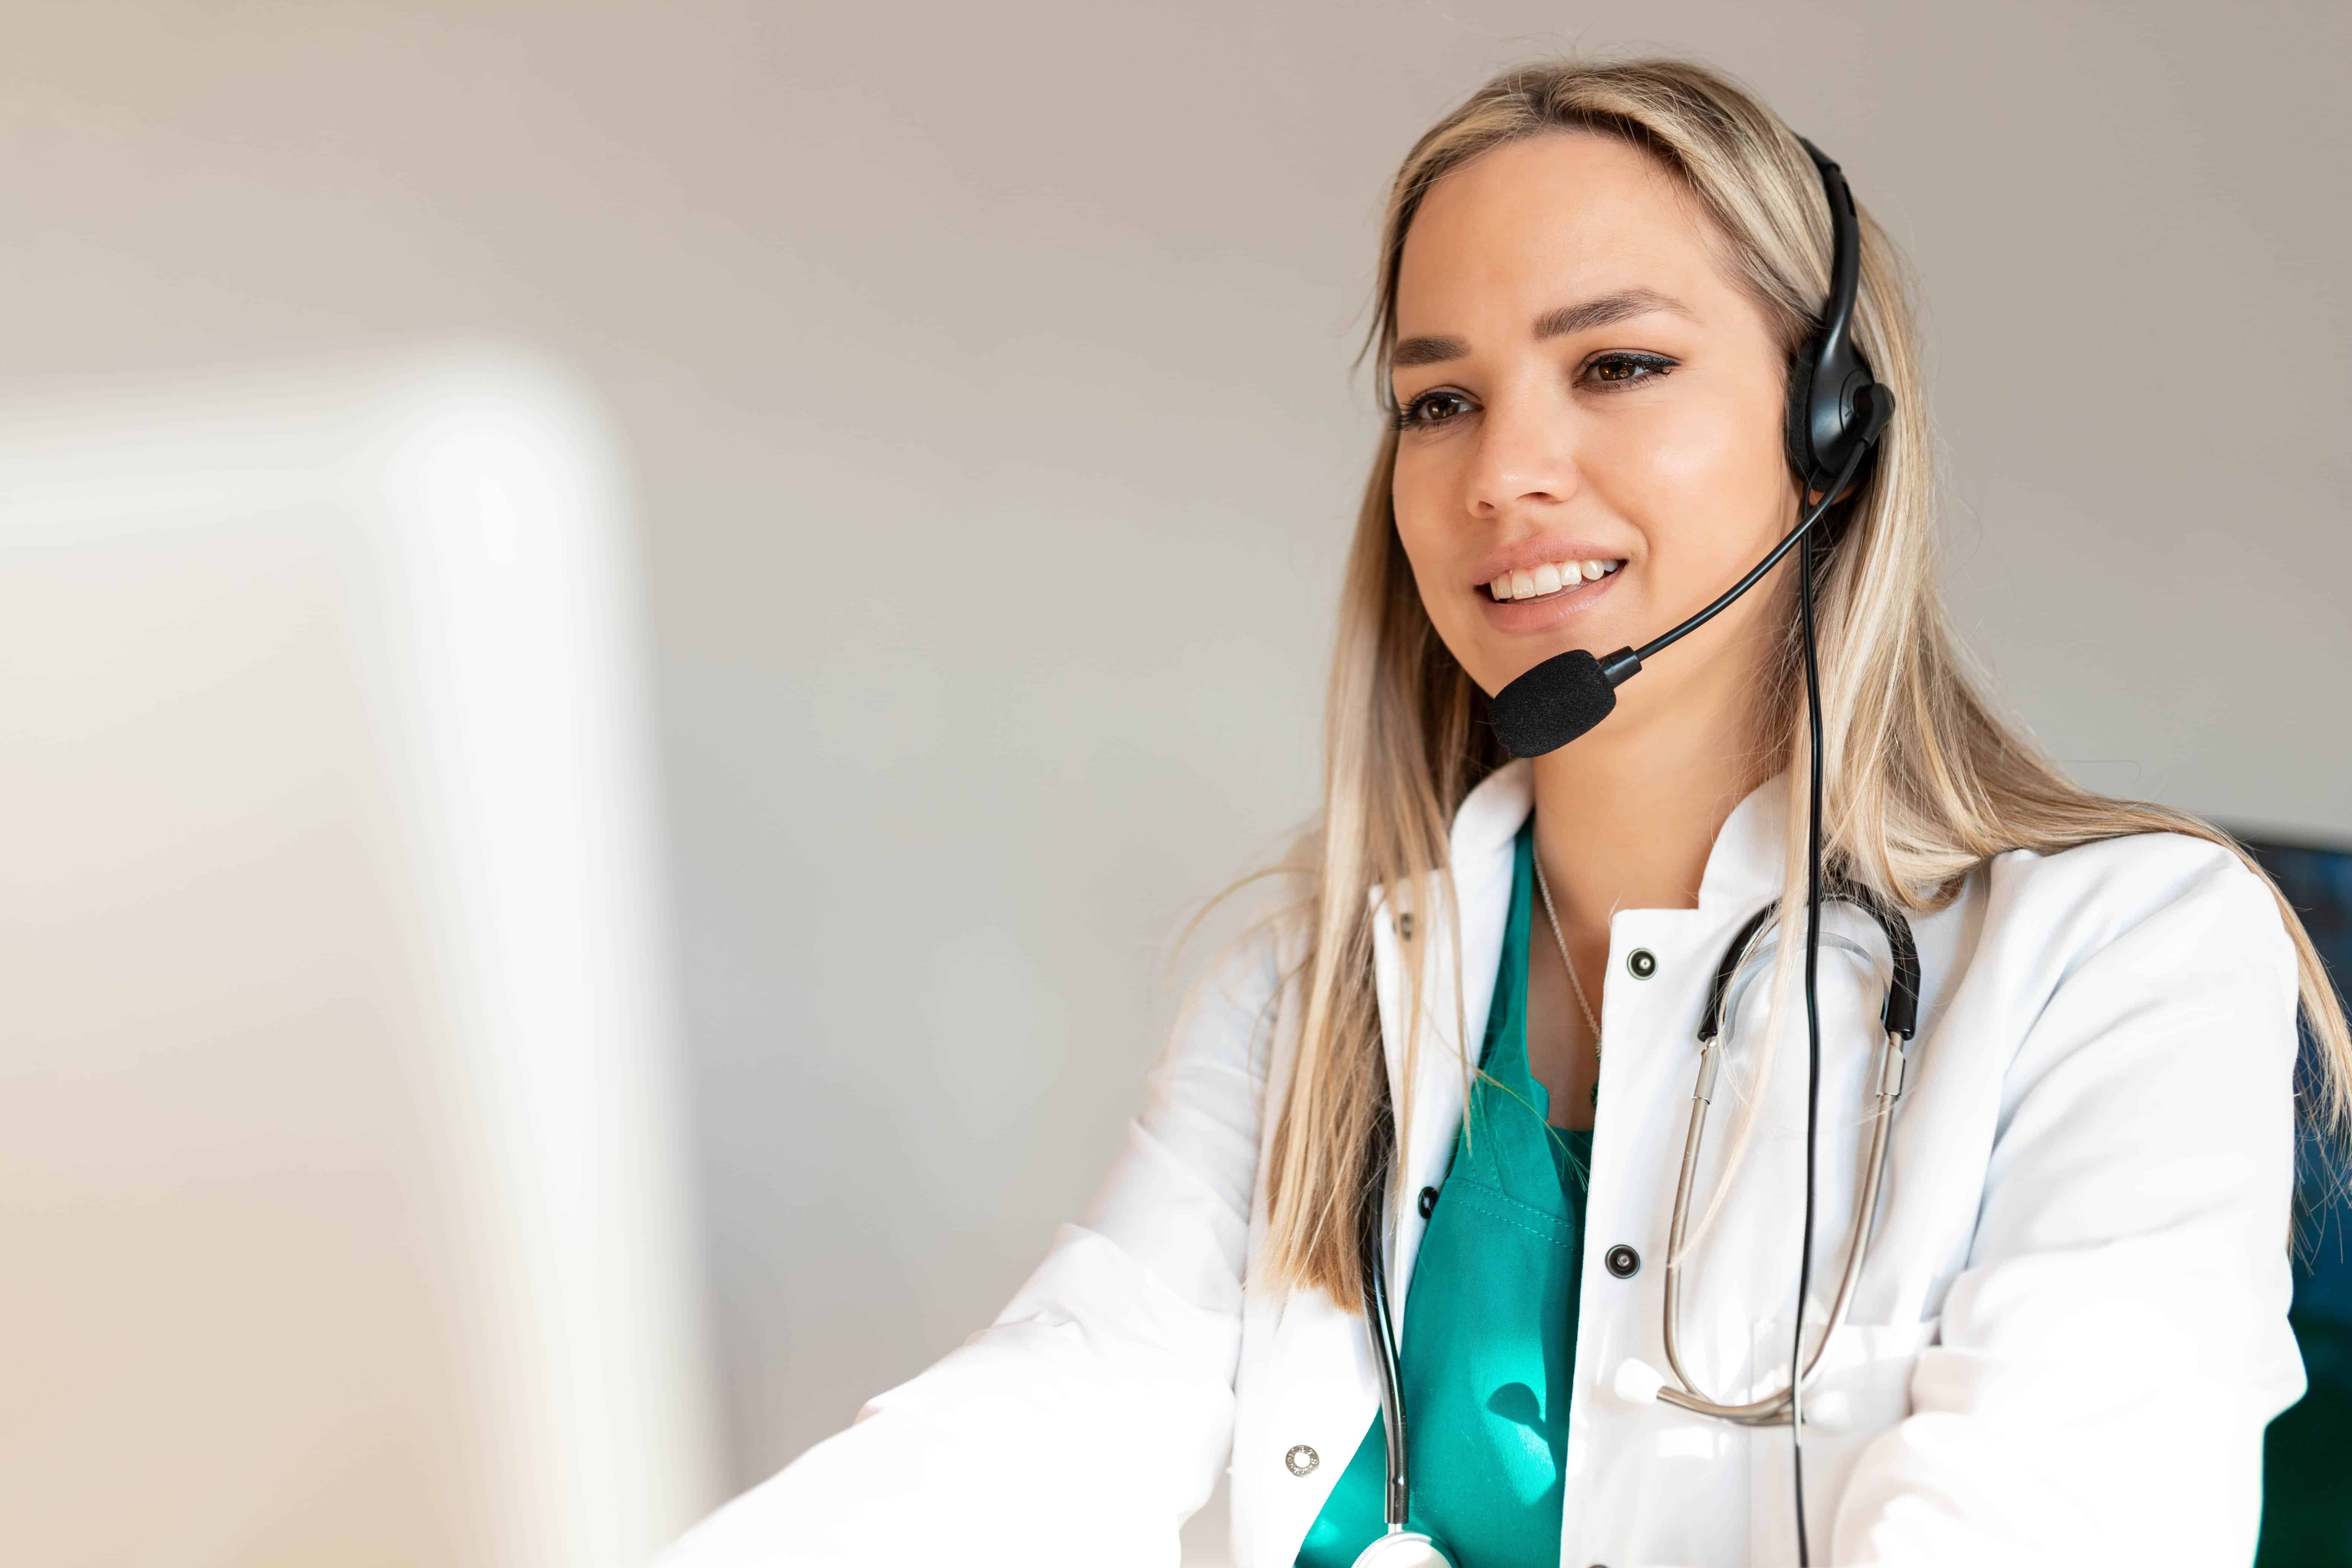 Smiling dispatcher with a headset on